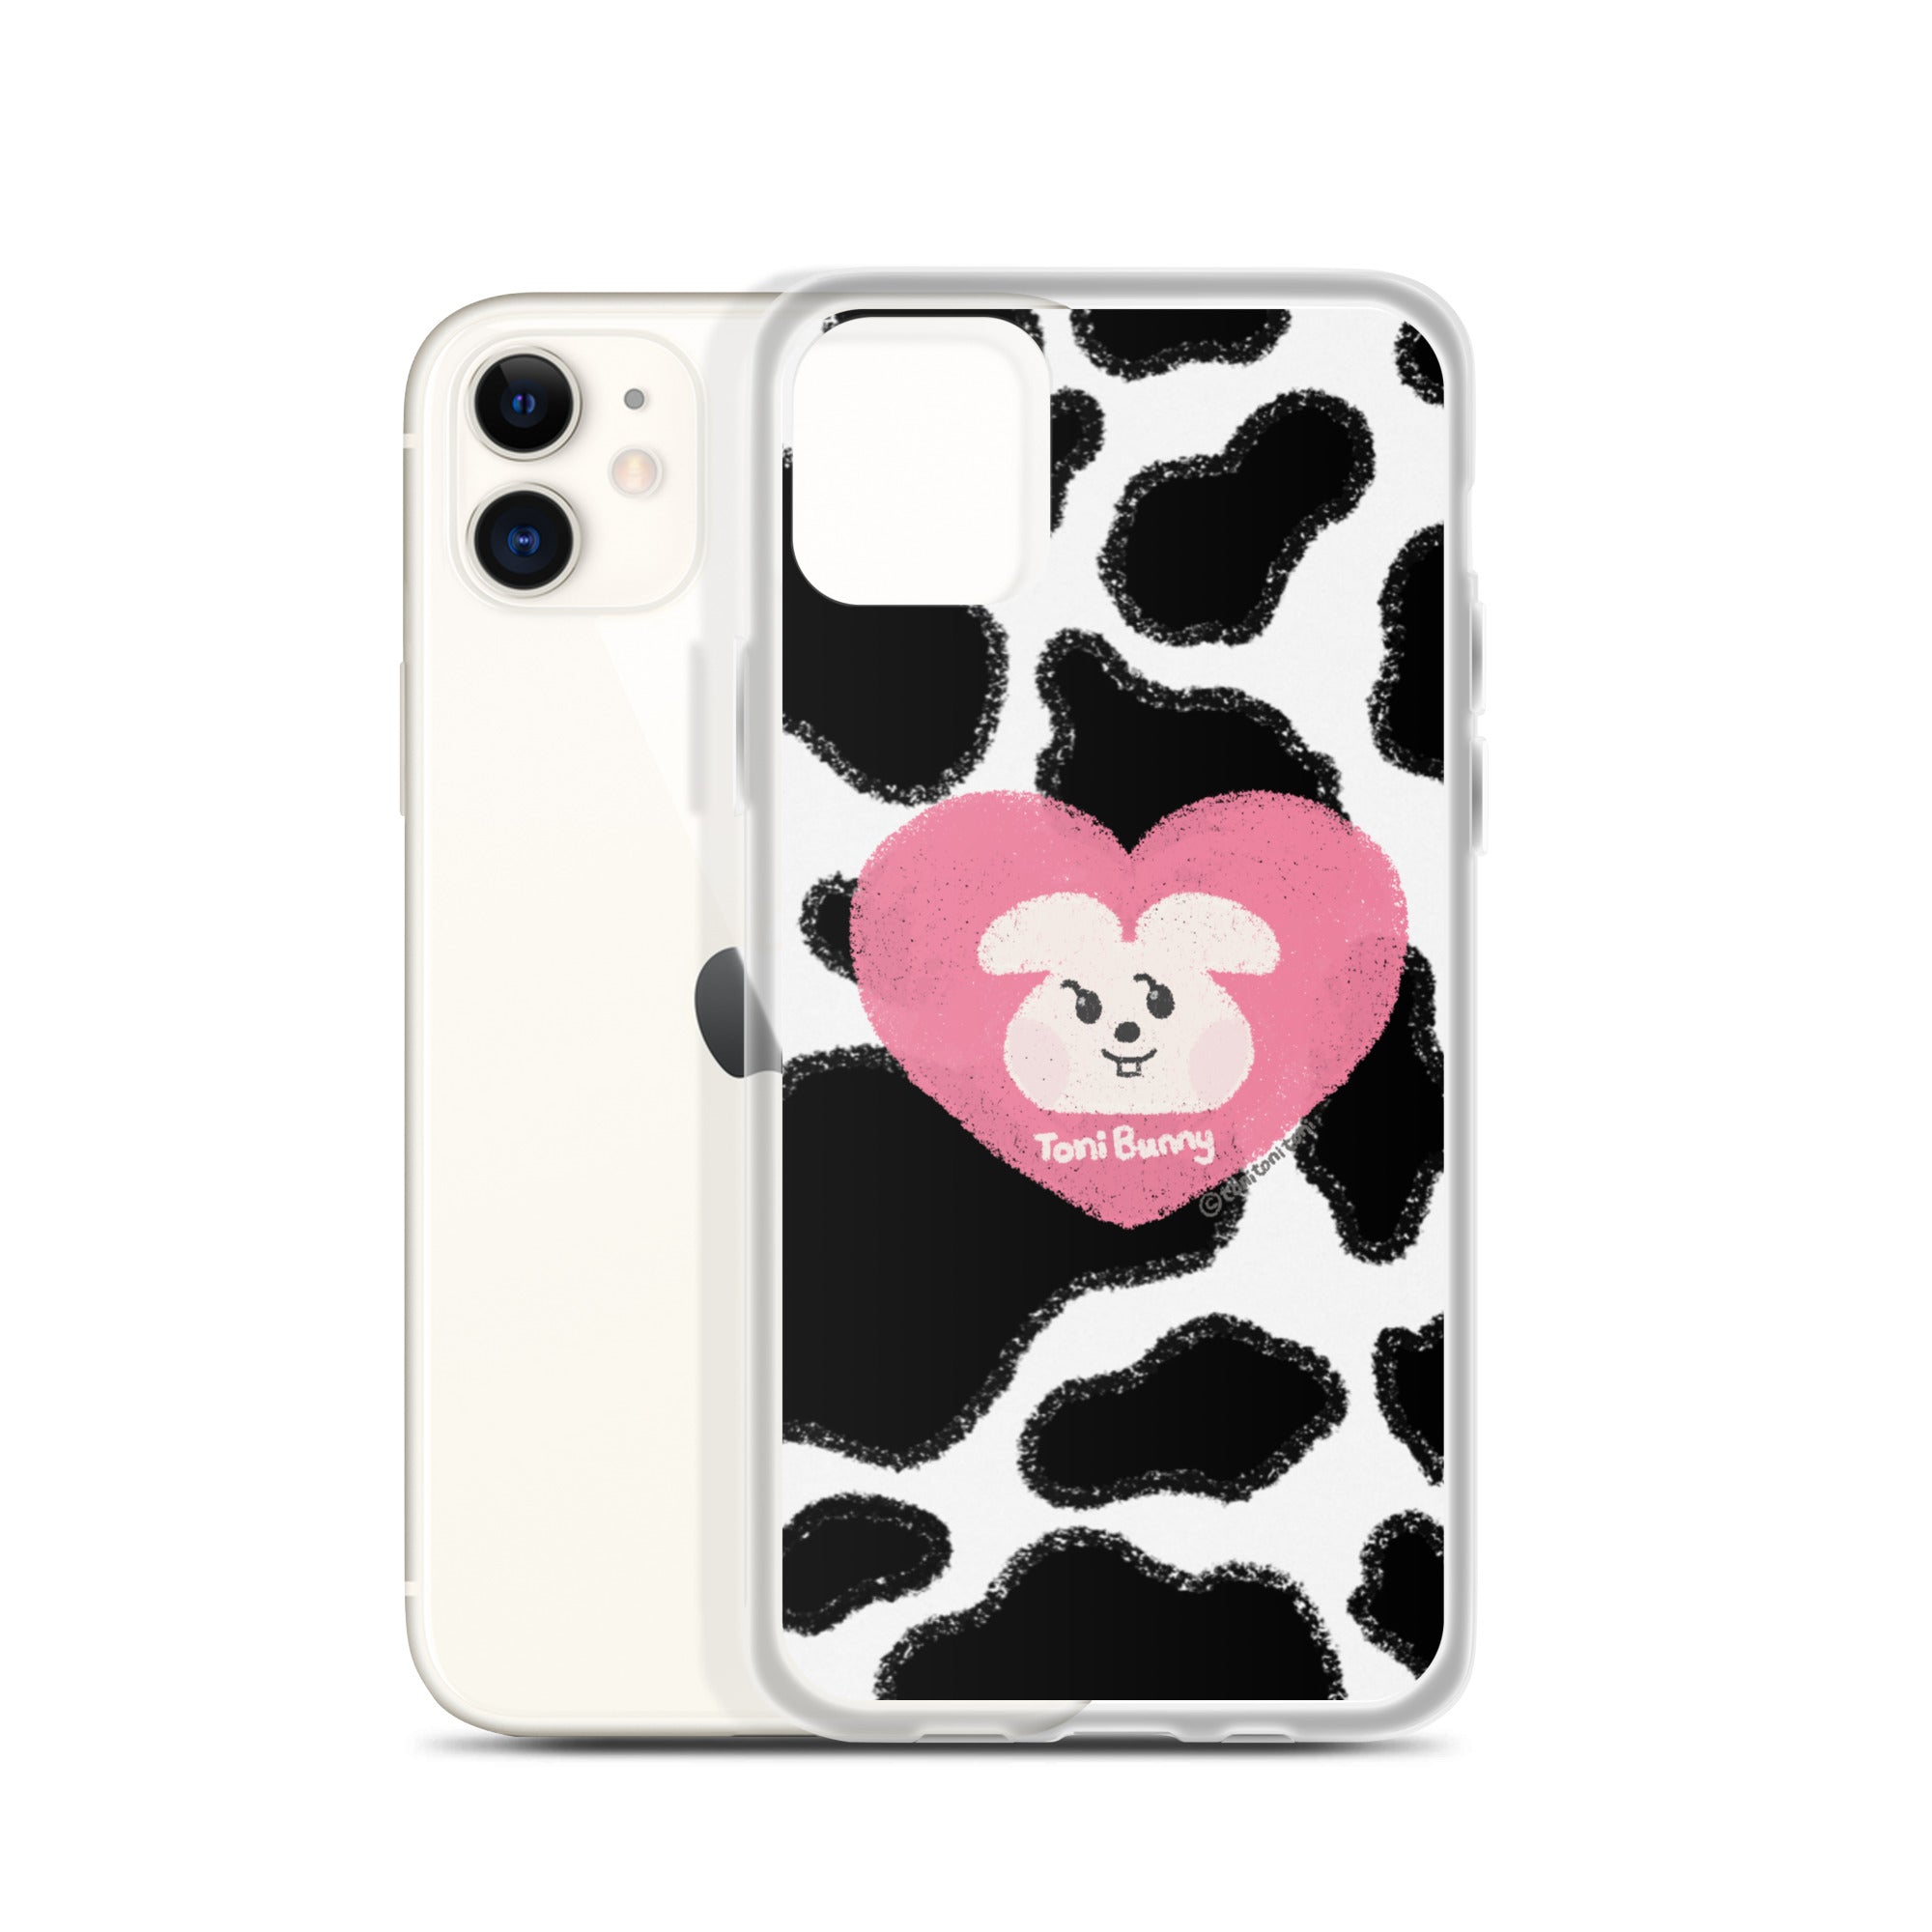 💖 ToniBunny Pink Heart Cow Print Edition iPhone Clear Case 💖